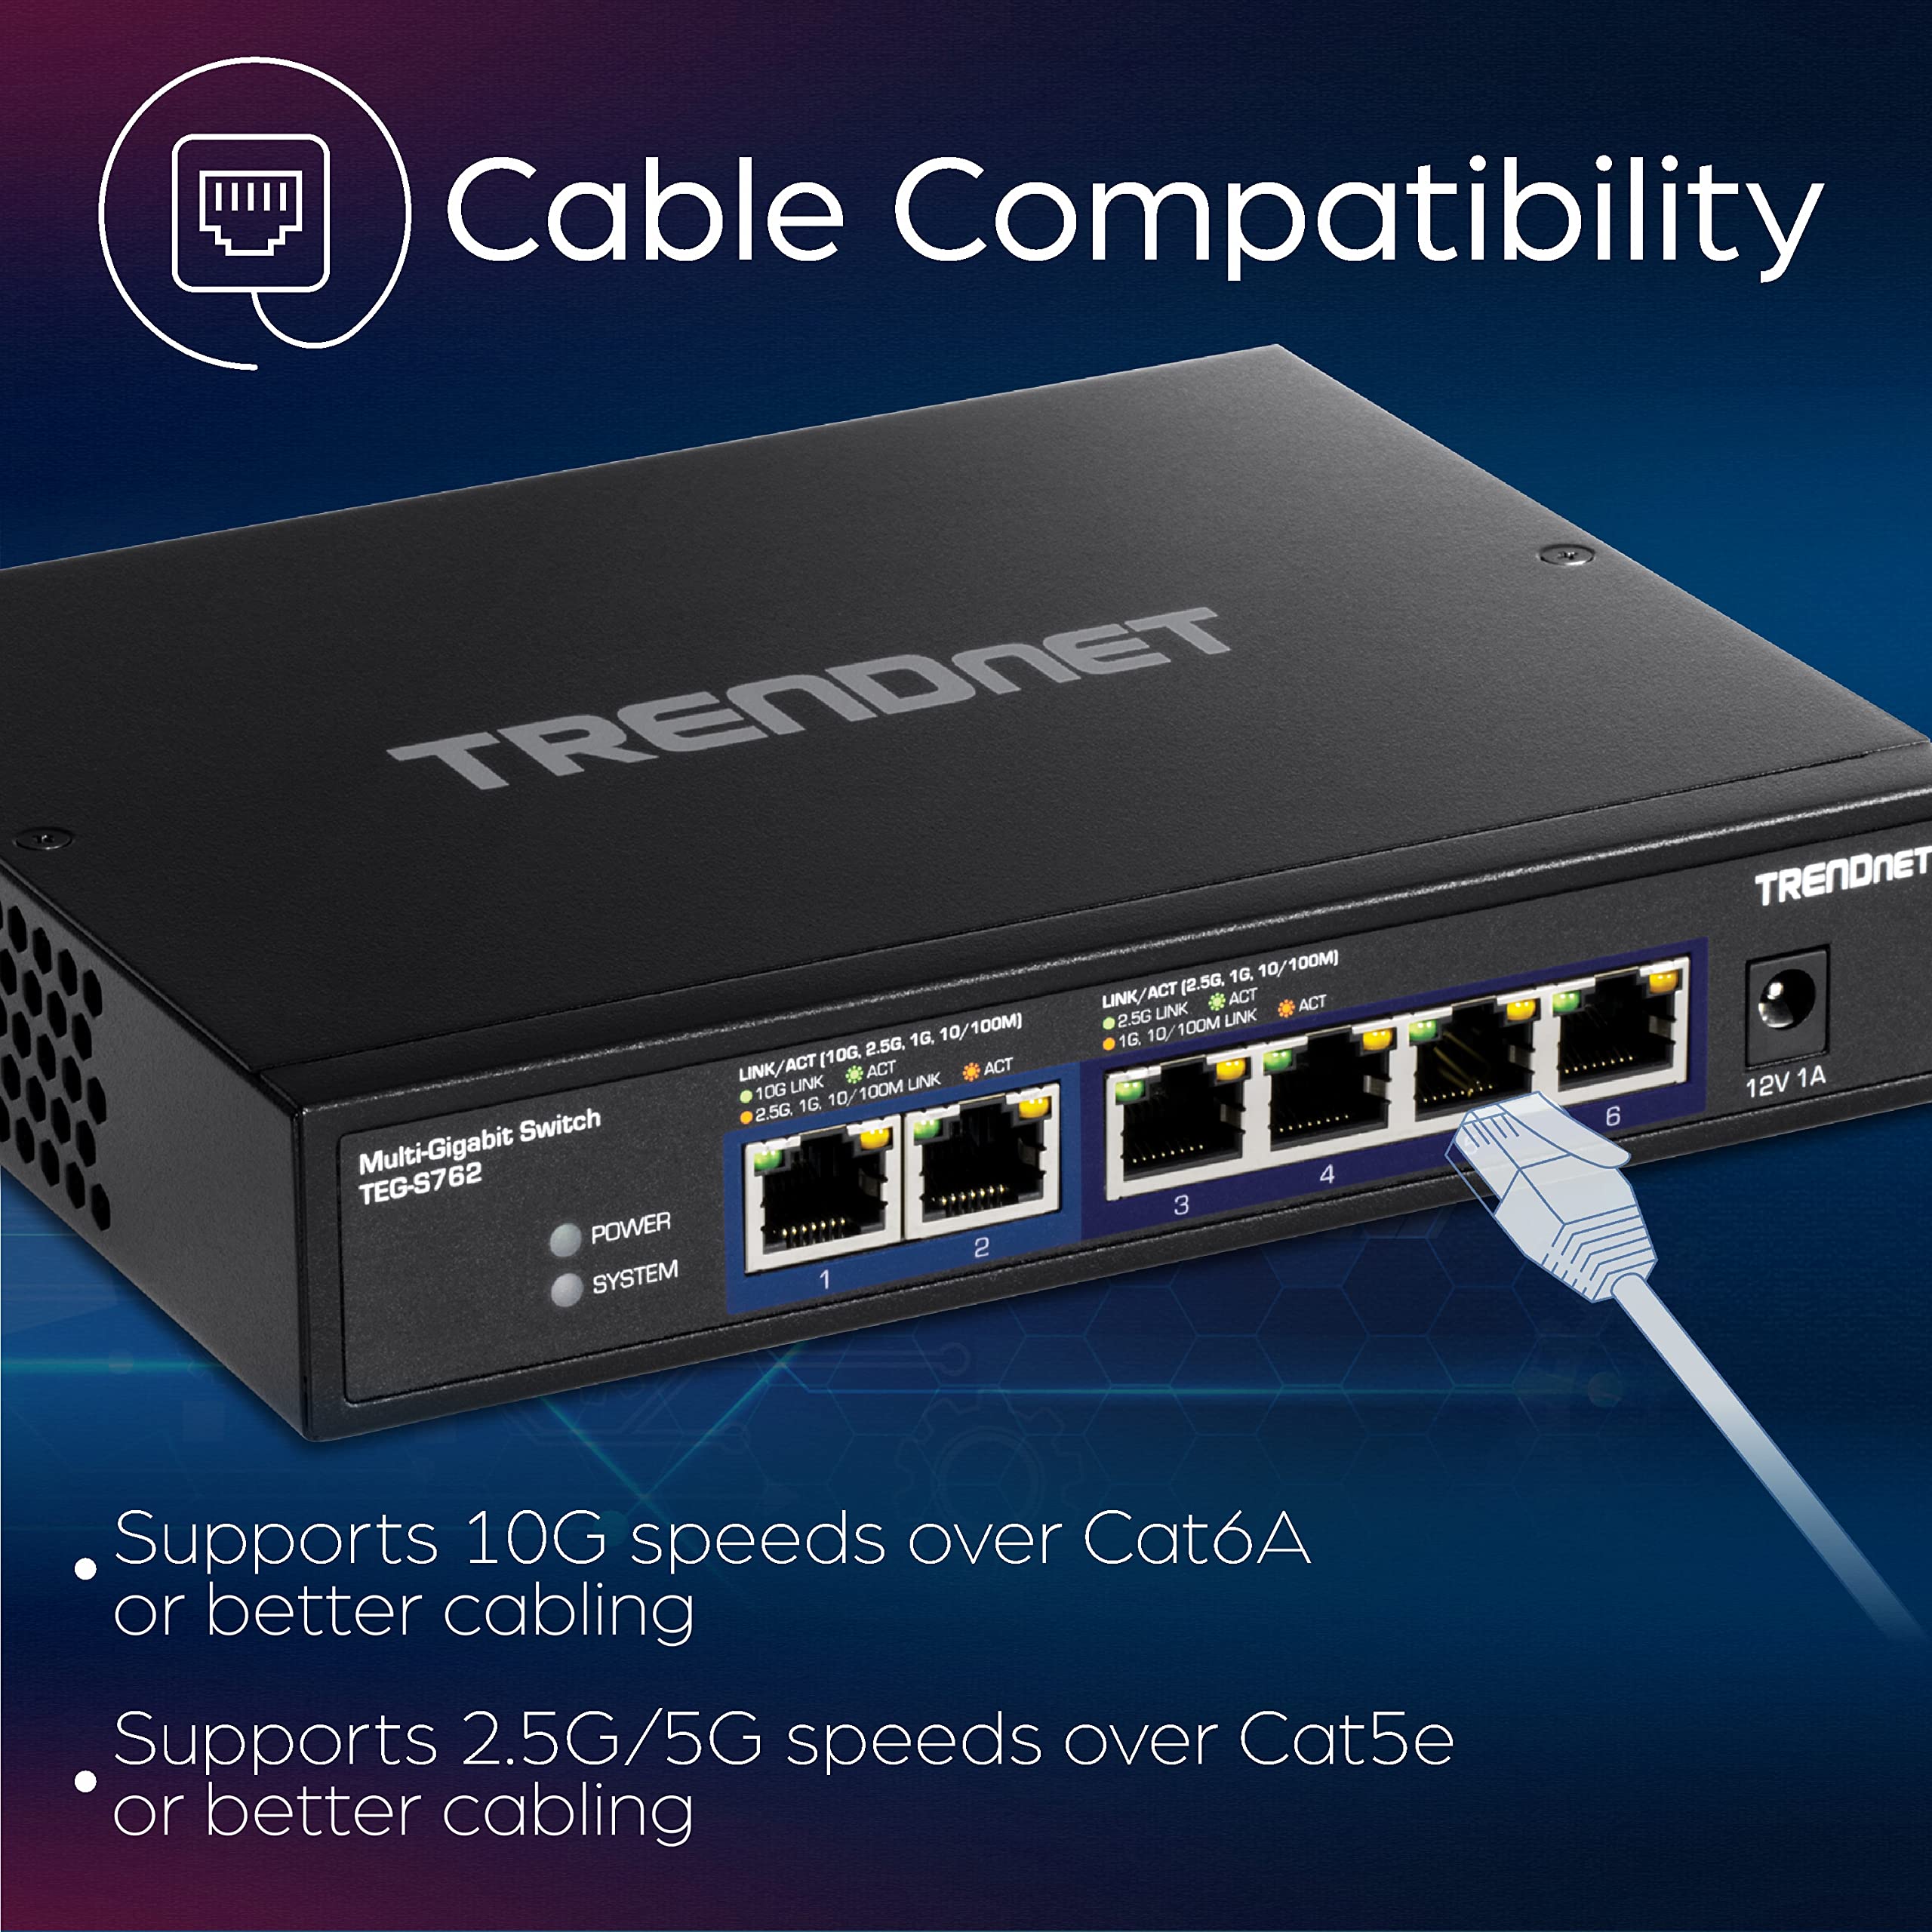 TRENDnet 6-Port 10G Switch, 4 x 2.5G RJ-45 BASE-T Ports, 2 x 10G RJ-45 Ports, 60Gbps Switching Capacity, Wall Mountable, 10 Gigabit Network Connections, Lifetime Protection, Black, TEG-S762